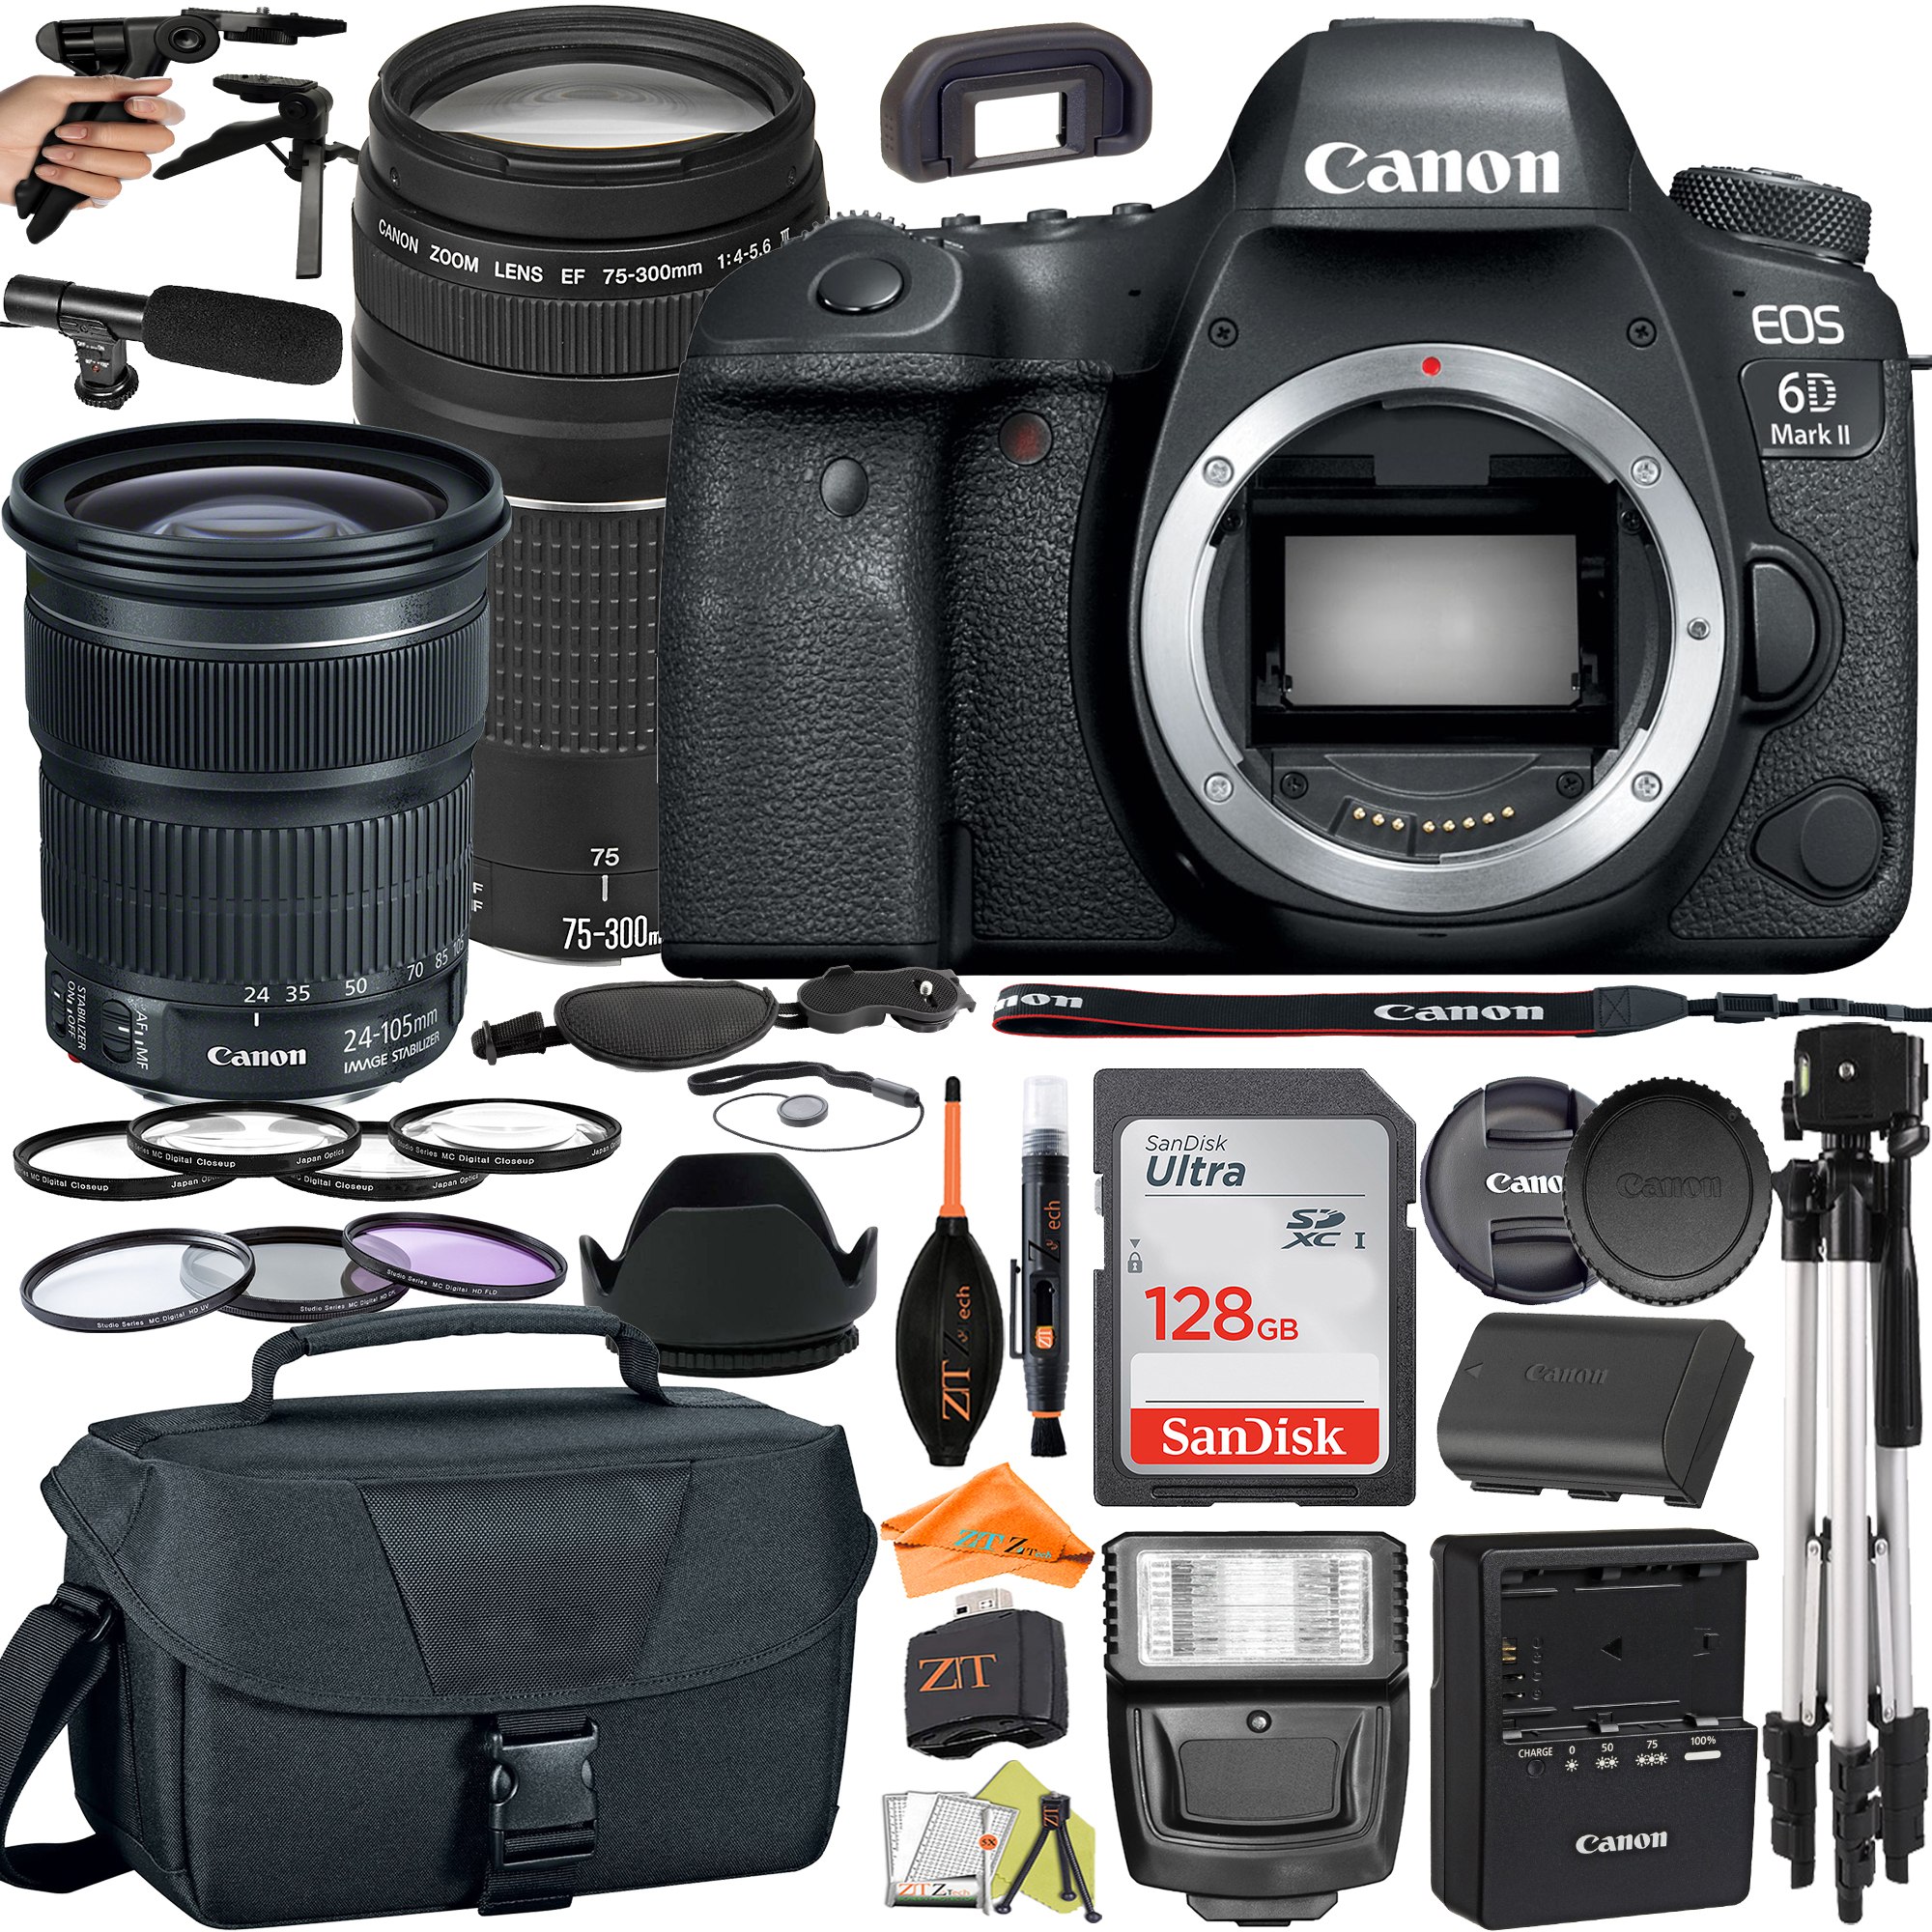 Canon EOS 6D Mark II DSLR Camera with 24-105mm + 75-300mm Lens + SanDisk 128GB + Microphone + Flash + ZeeTech Accessory Bundle